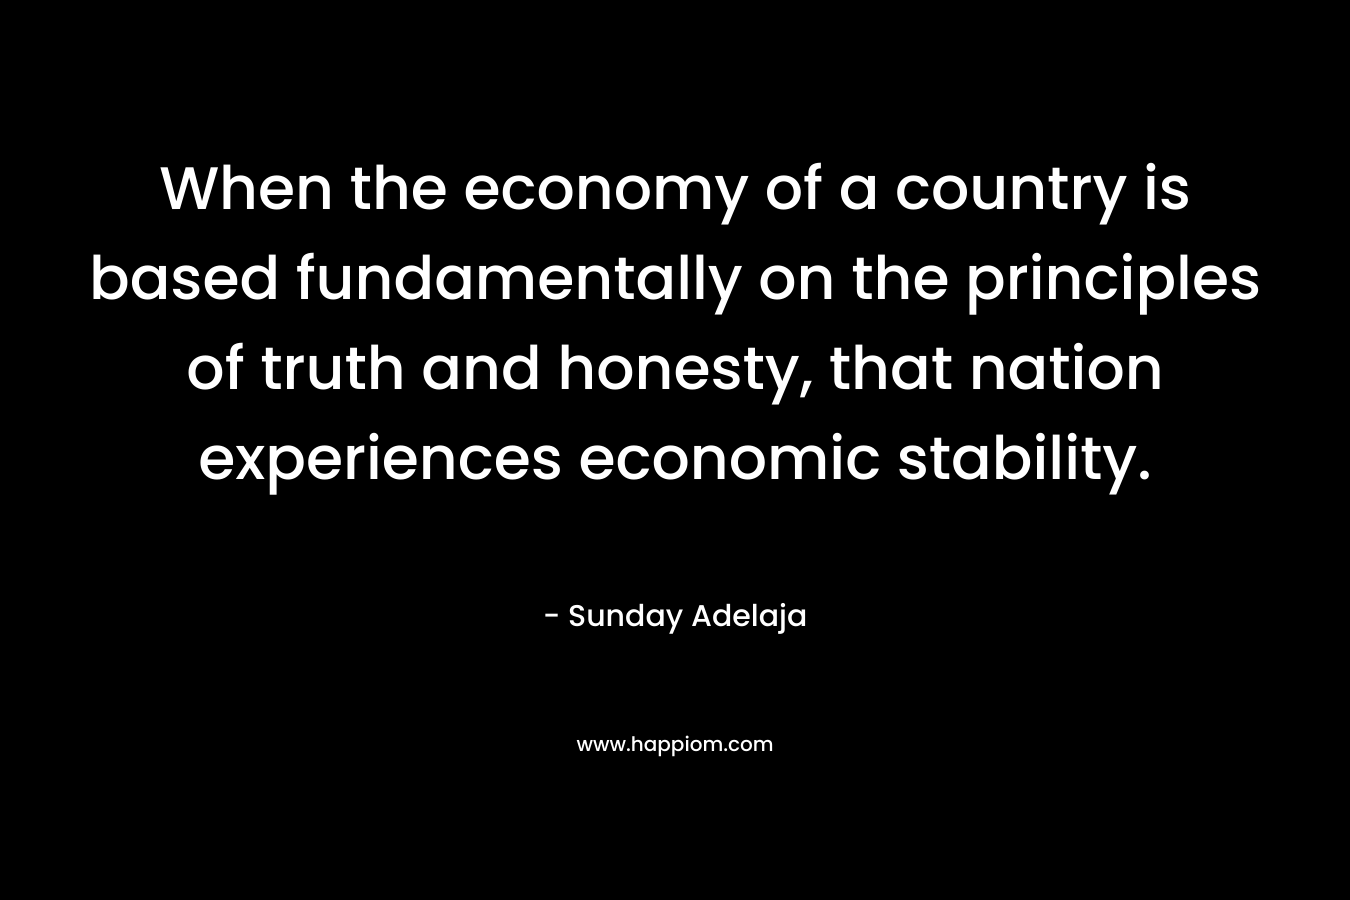 When the economy of a country is based fundamentally on the principles of truth and honesty, that nation experiences economic stability. – Sunday Adelaja